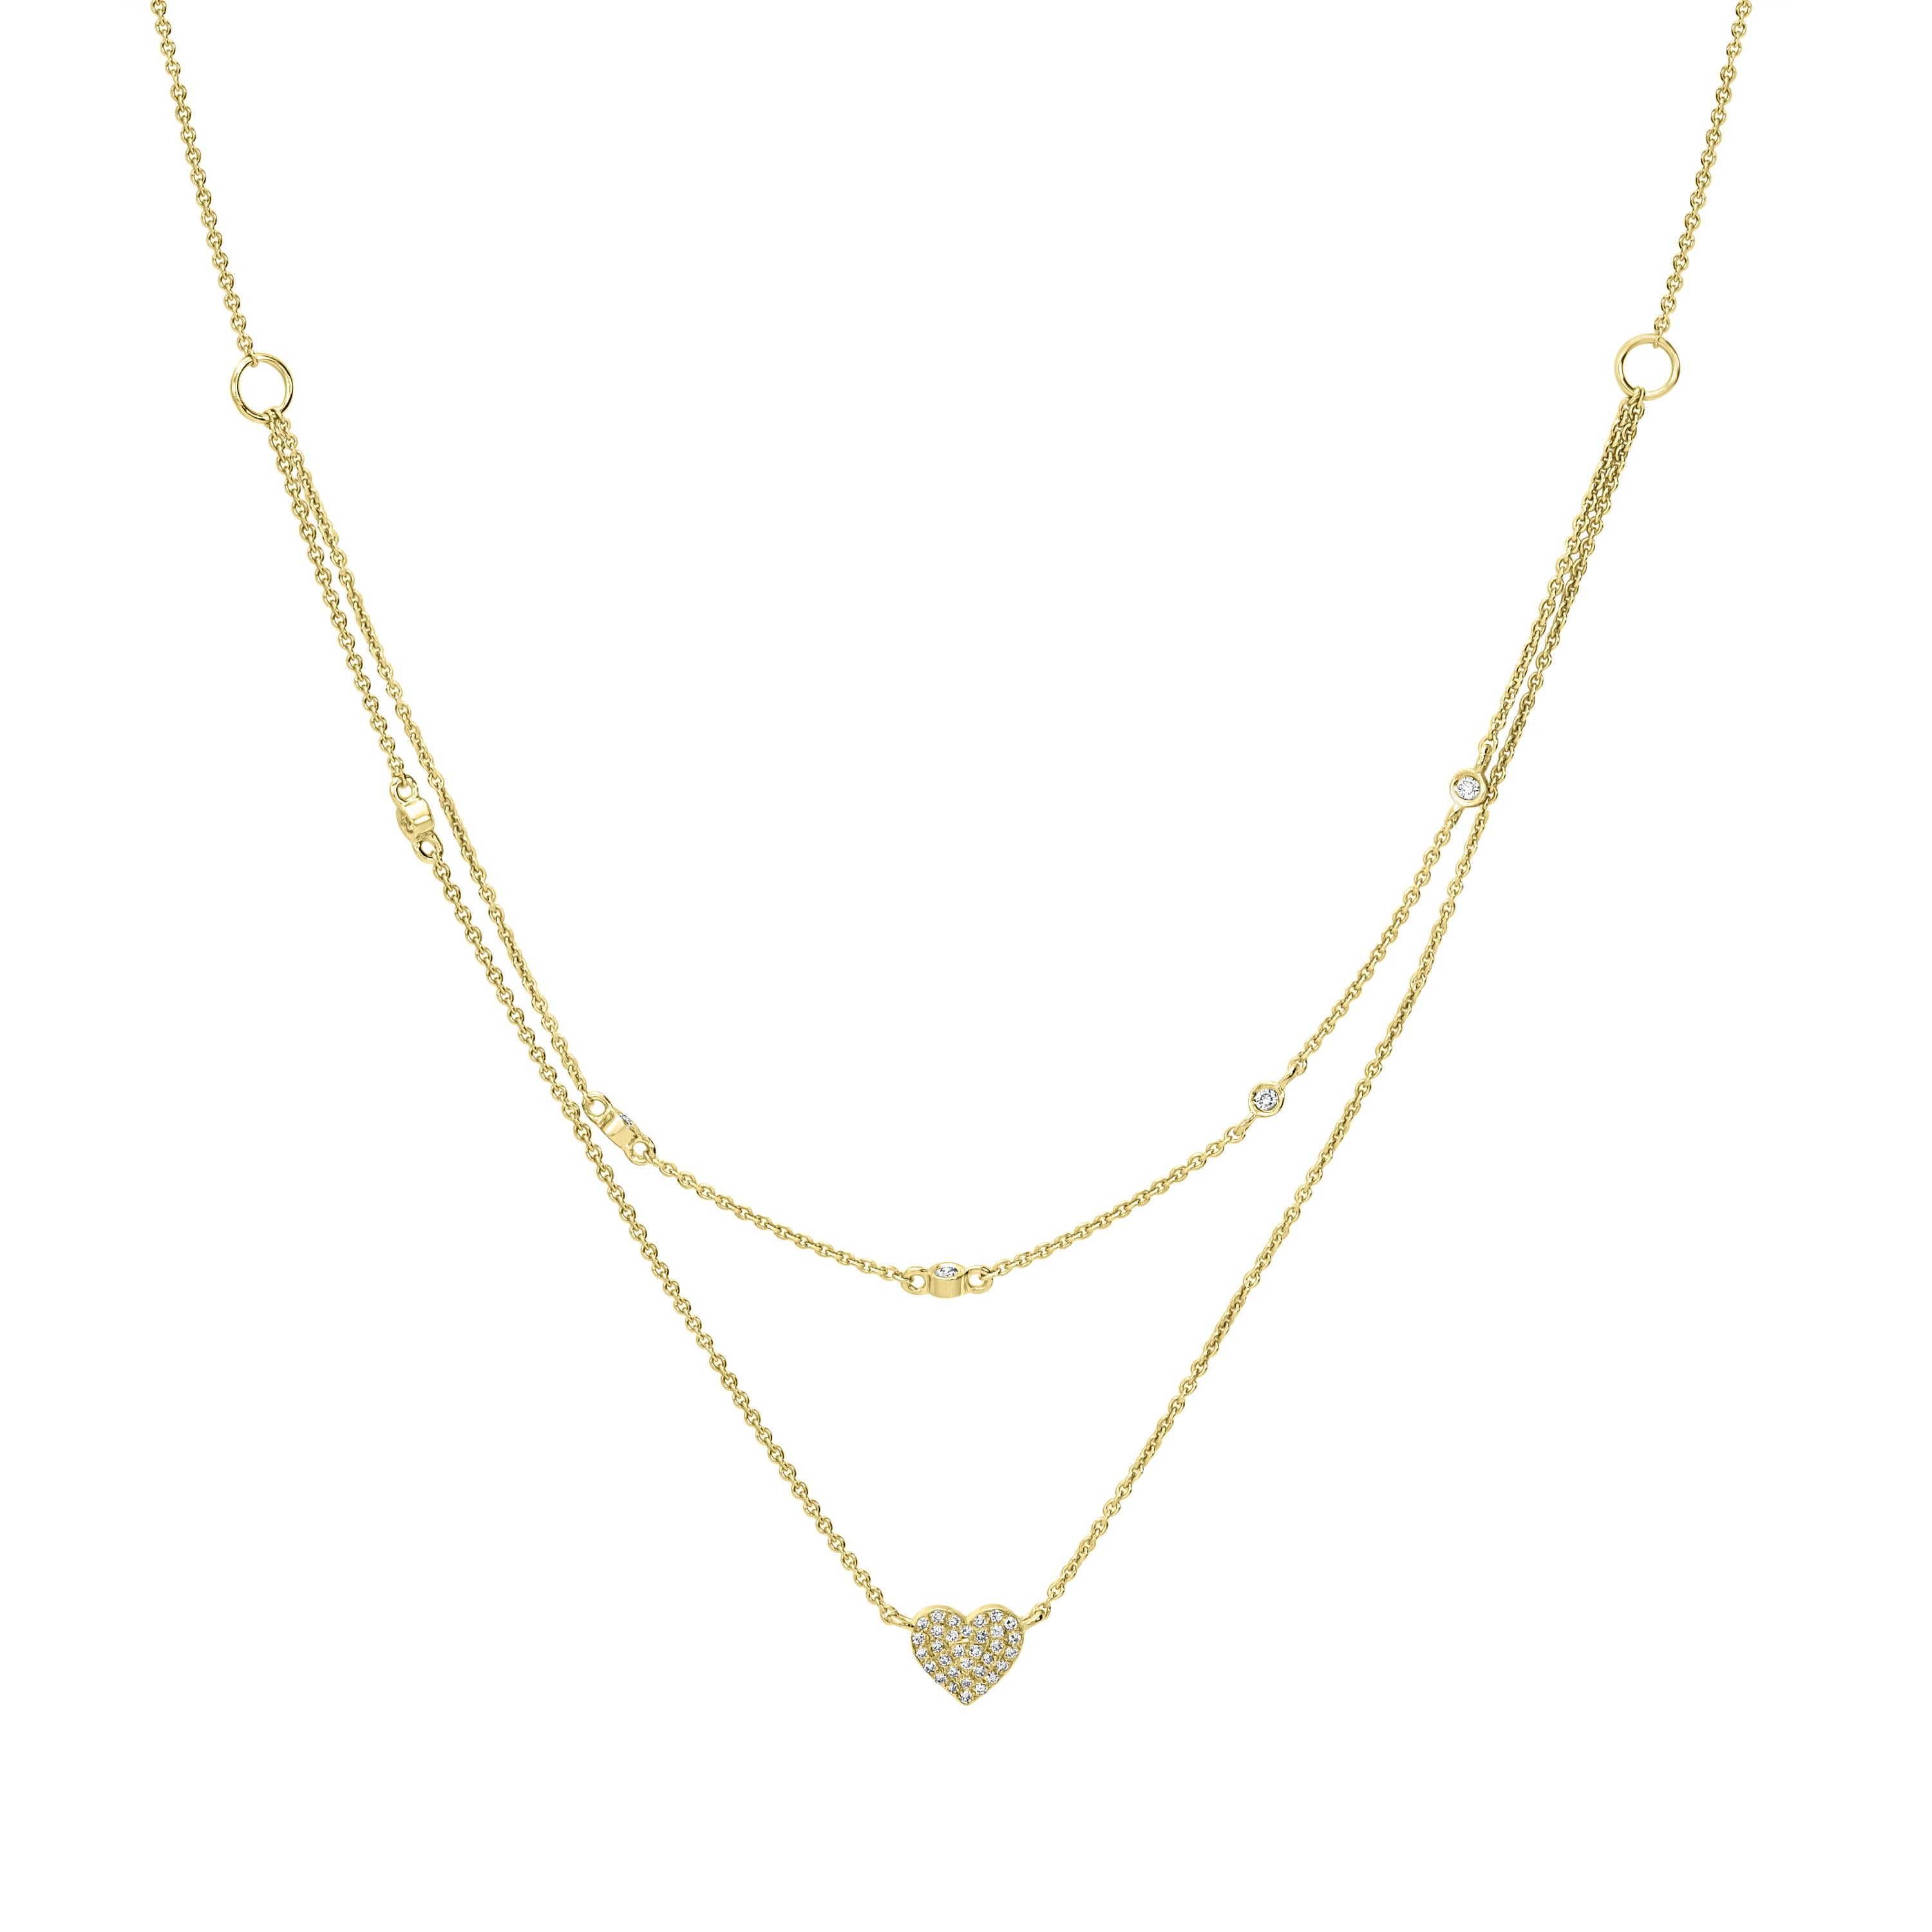 Simple, yet elegant, this Luxle double-strand heart necklace offers a look that is sure to captivate. This stunning double-strand necklace with a heart design dangling down elegantly will add a little love to your attire. The necklace is made of 14K